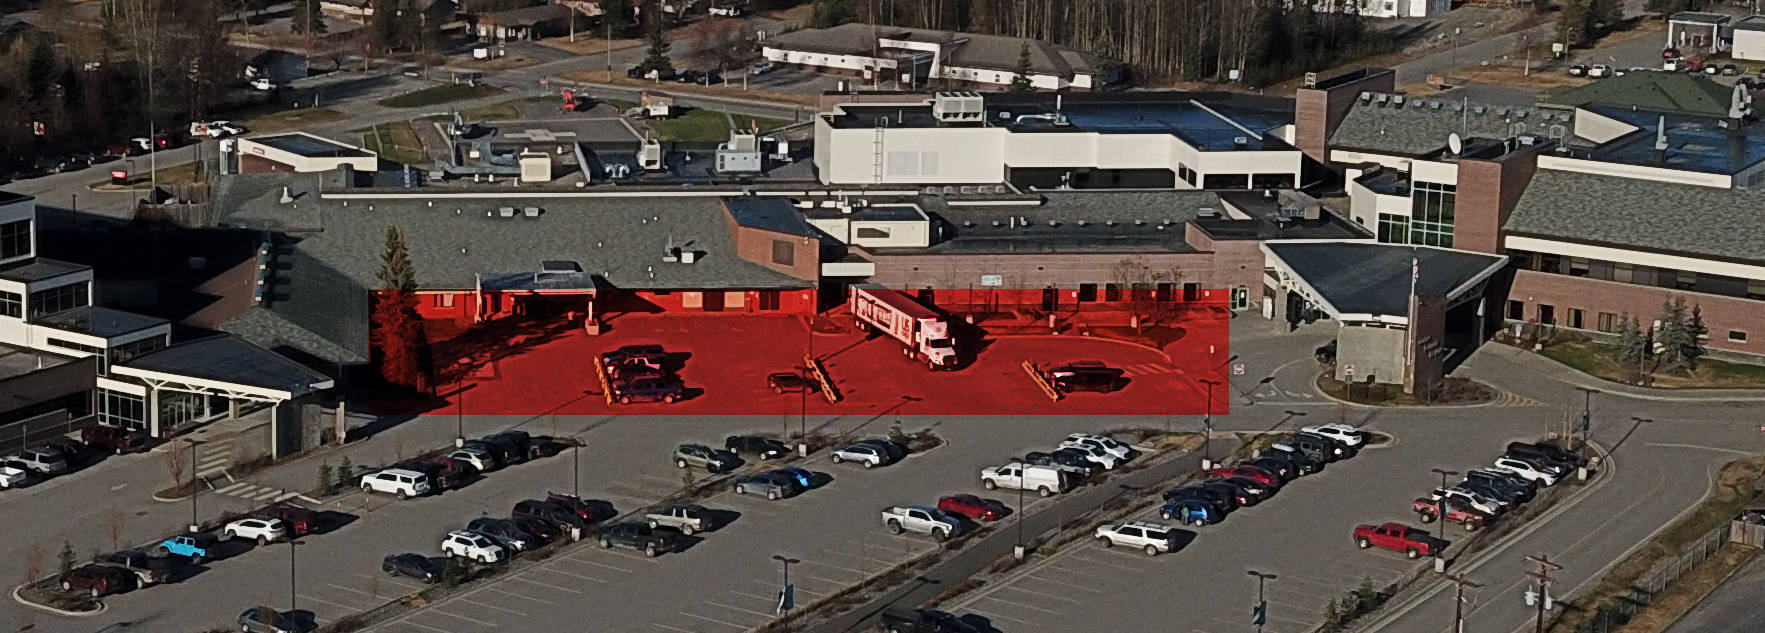 A parking lot set to be reconstructed is seen highlighted in red at Central Peninsula Hospital in Soldotna, Alaska. (Photo by Bruce Richards)